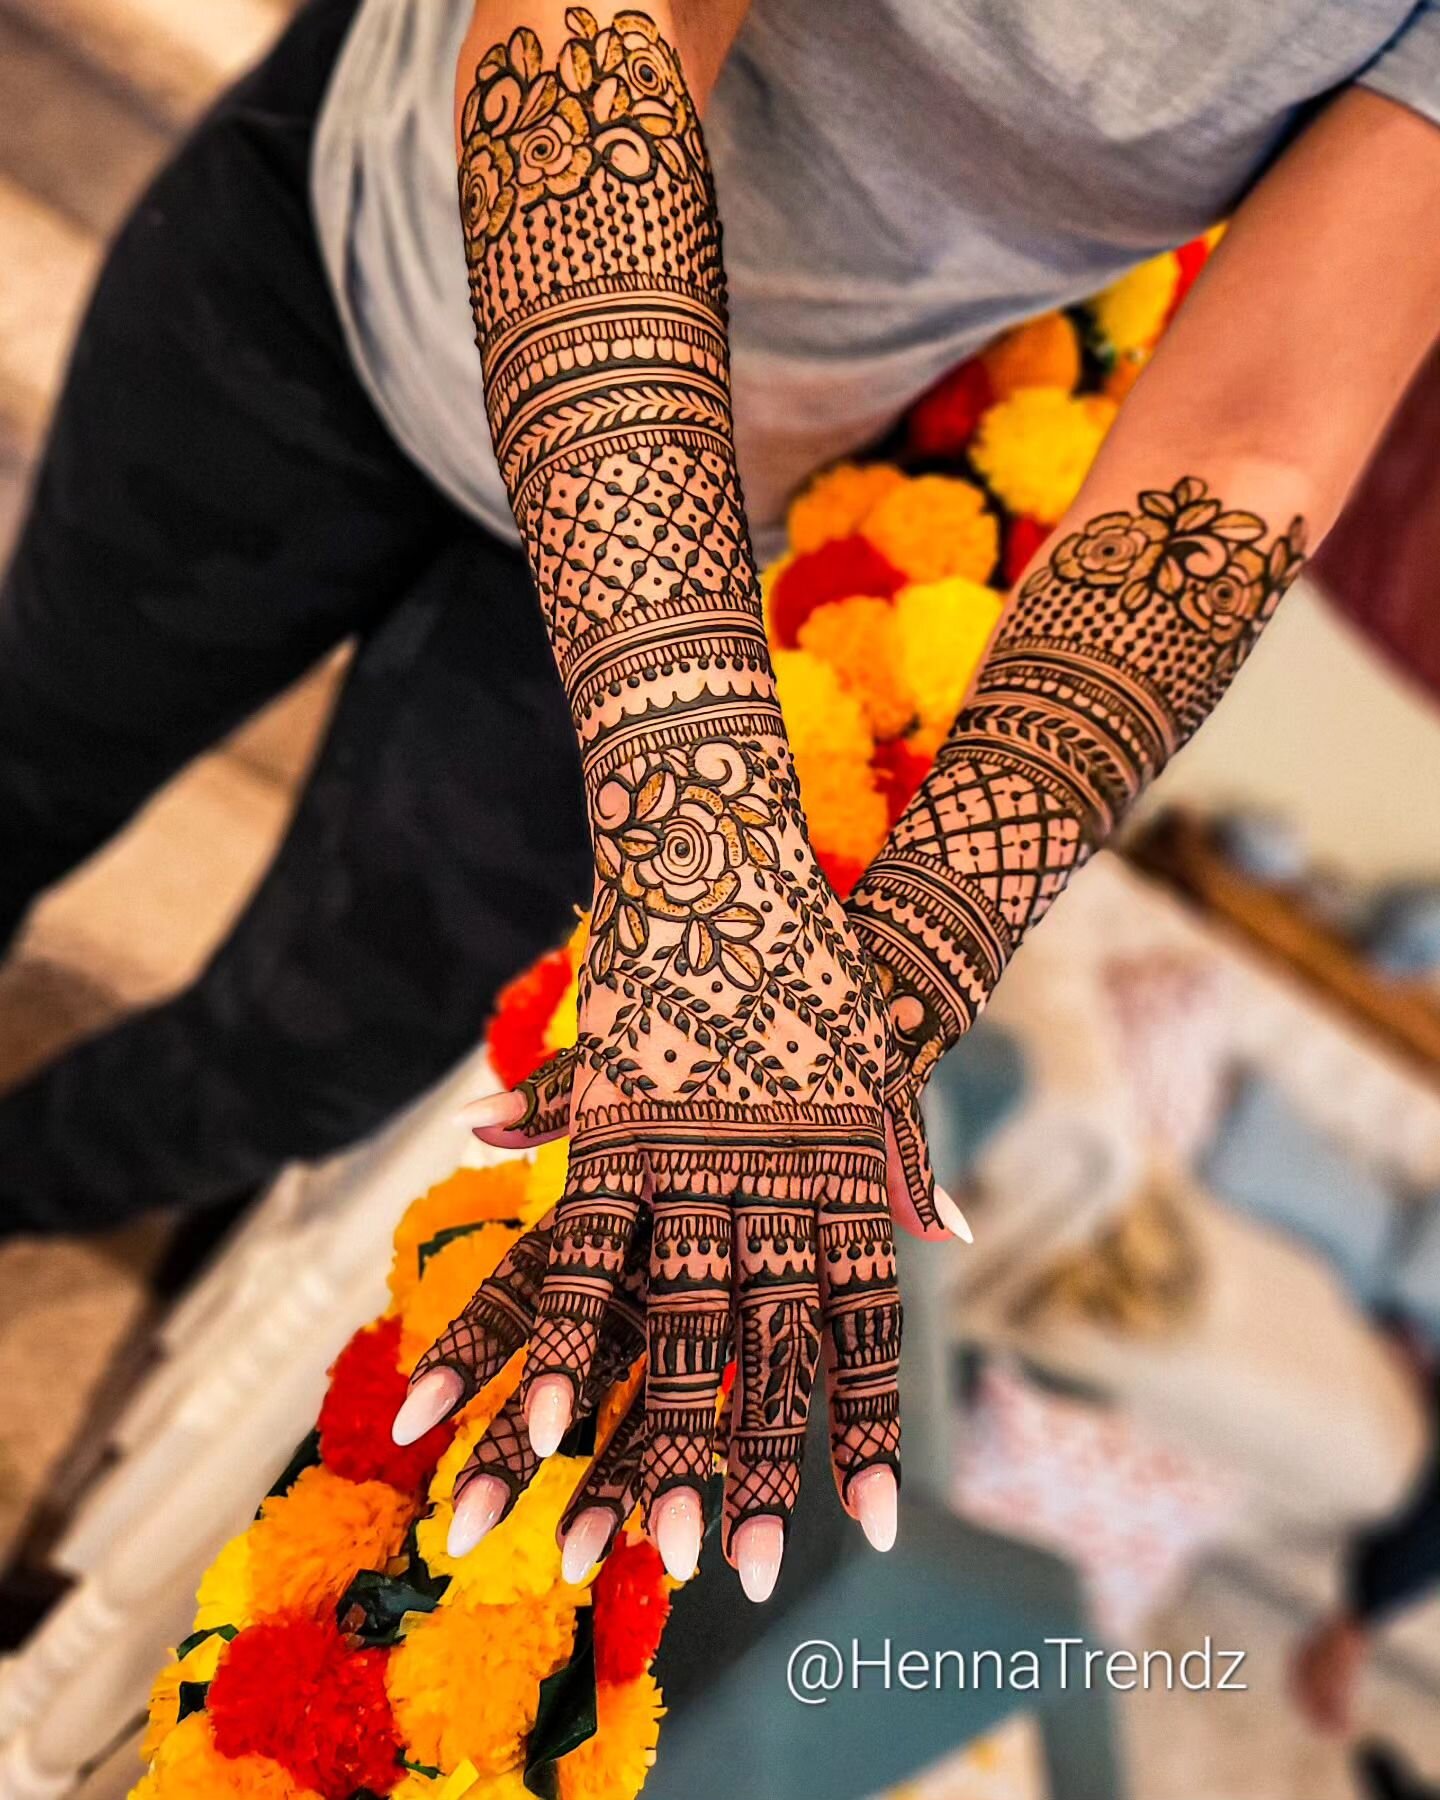 Simran's bridal henna🥰❤️✔️

FOLLOW @hennatrendz
YOUTUBE: HennaTrendz

💖💖Weekends are the best time to place your orders for fresh henna cones... I mix fresh batches every weekend to ship out on Monday!! visit link in bio and go to SHOP page for pr